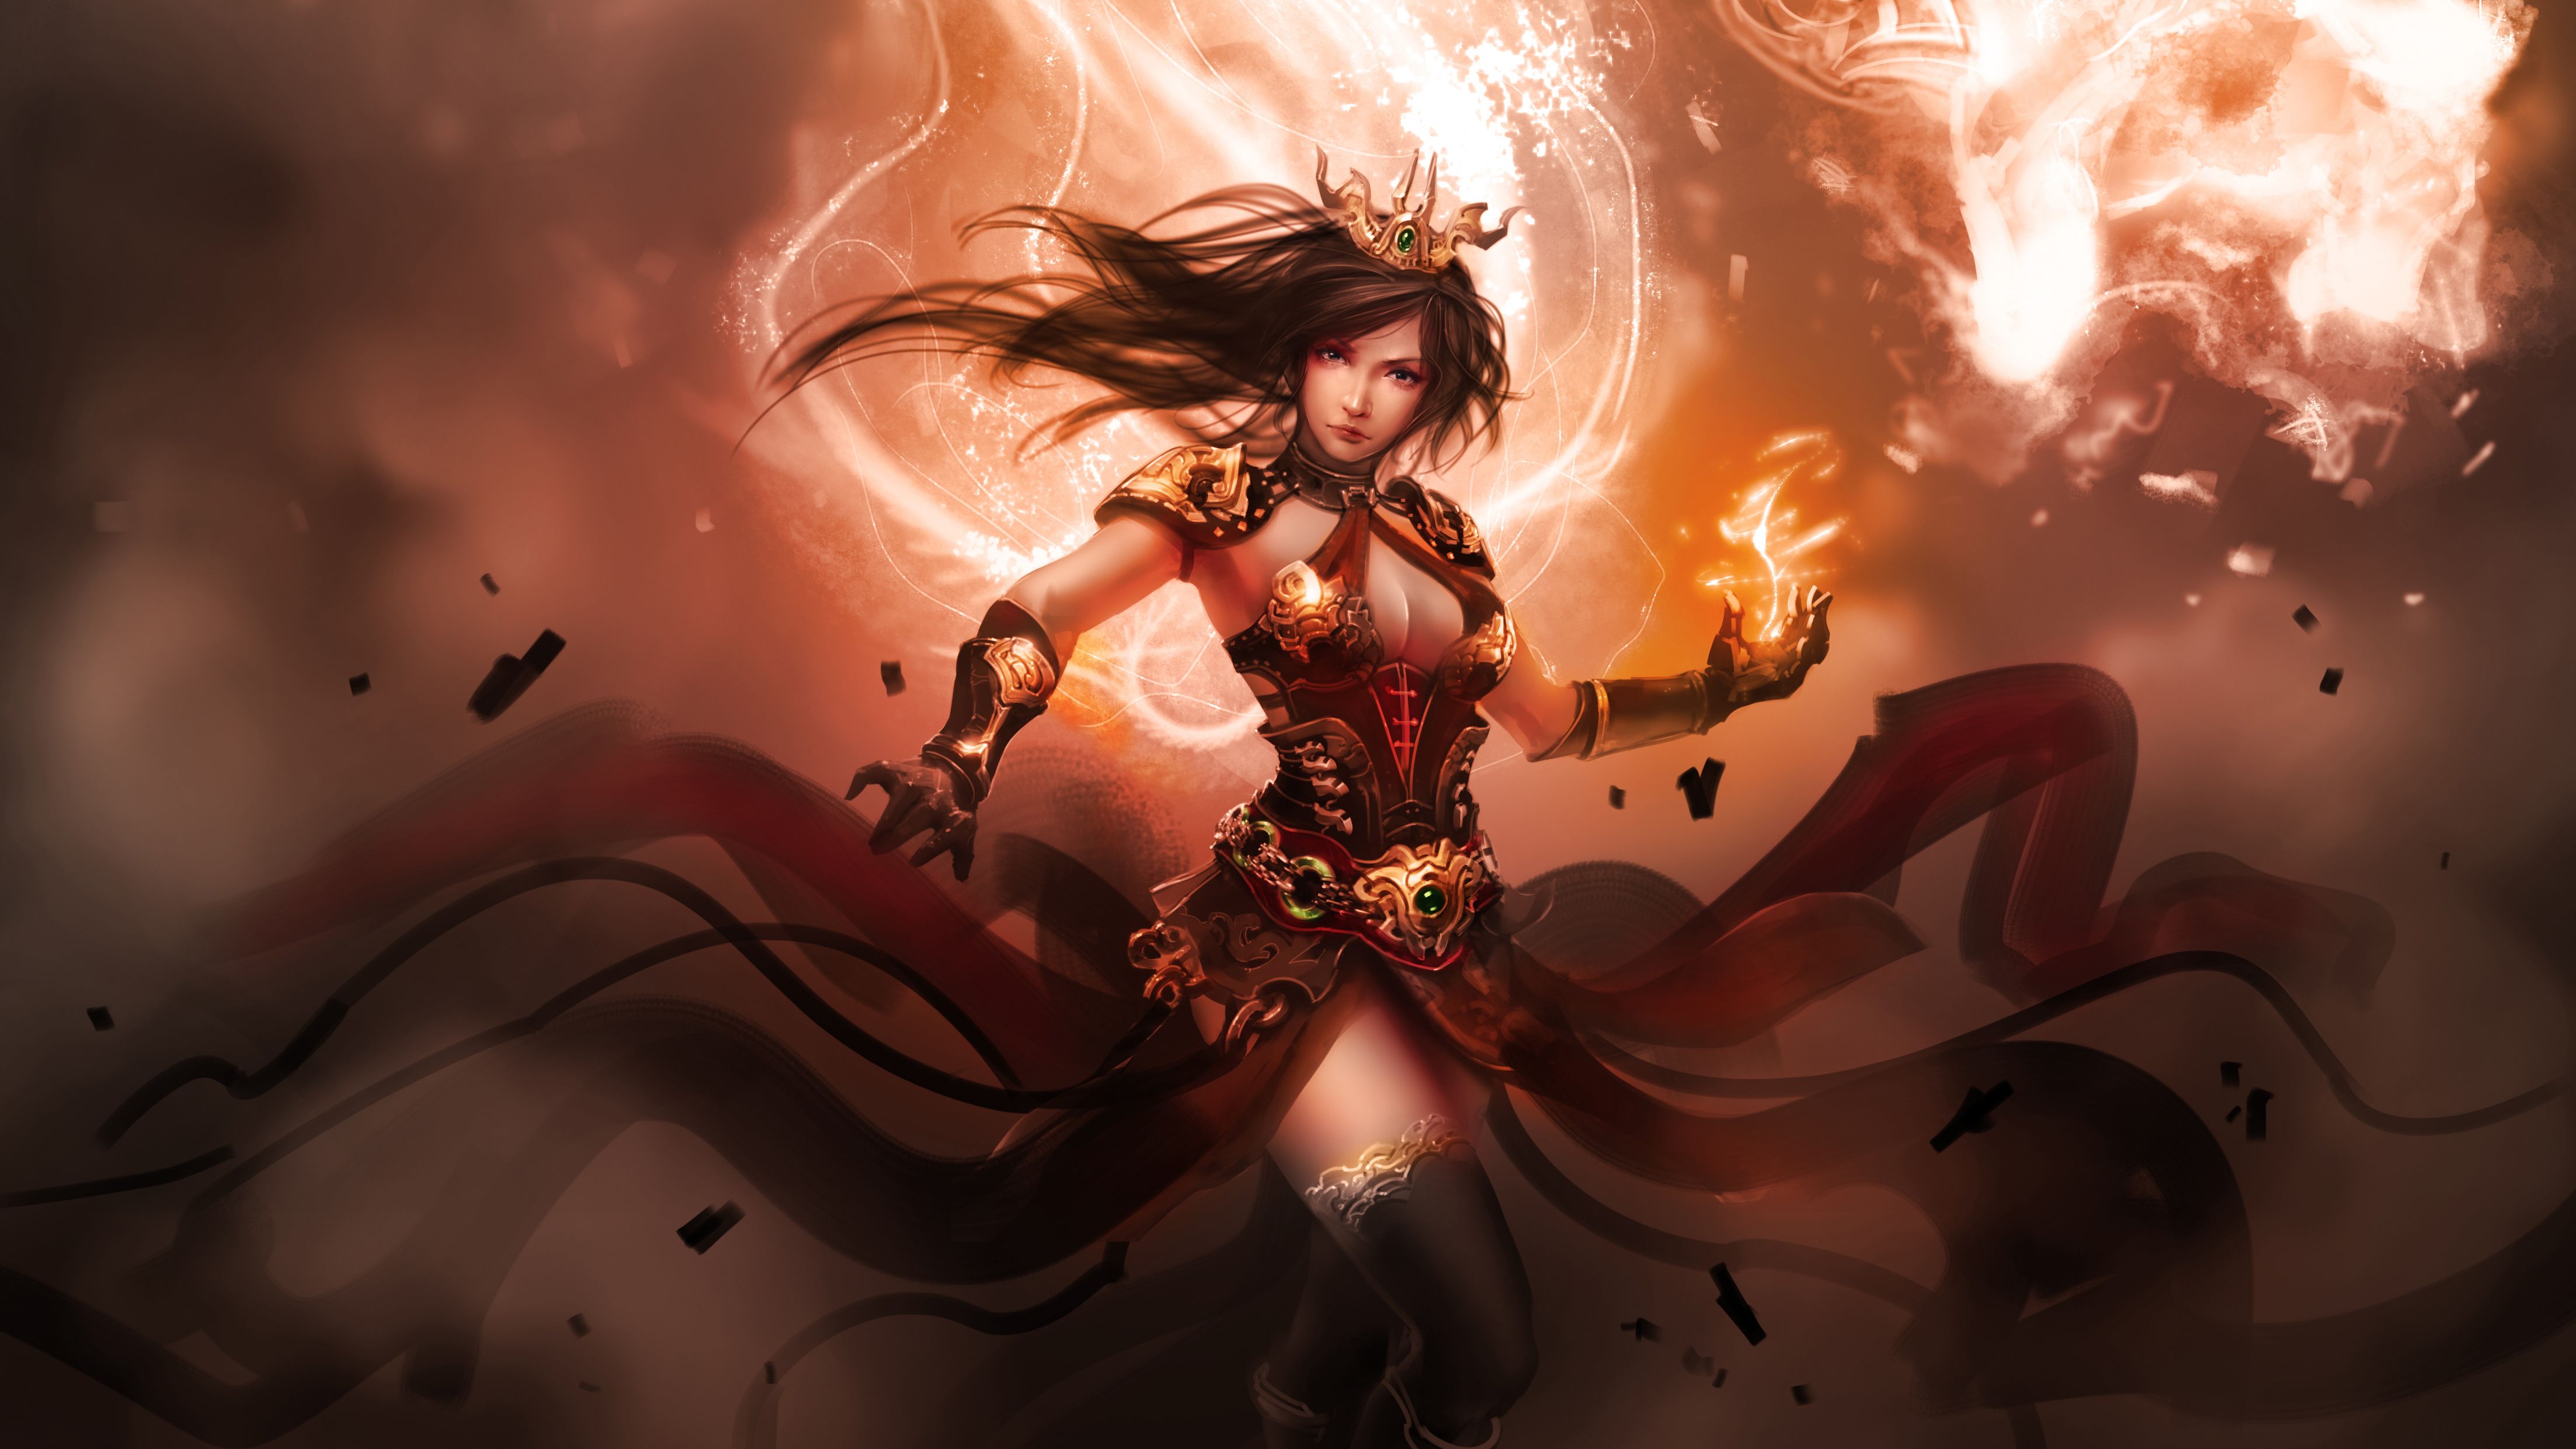 Female Warrior Fantasy 4k, HD Artist, 4k Wallpaper, Image, Background, Photo and Picture